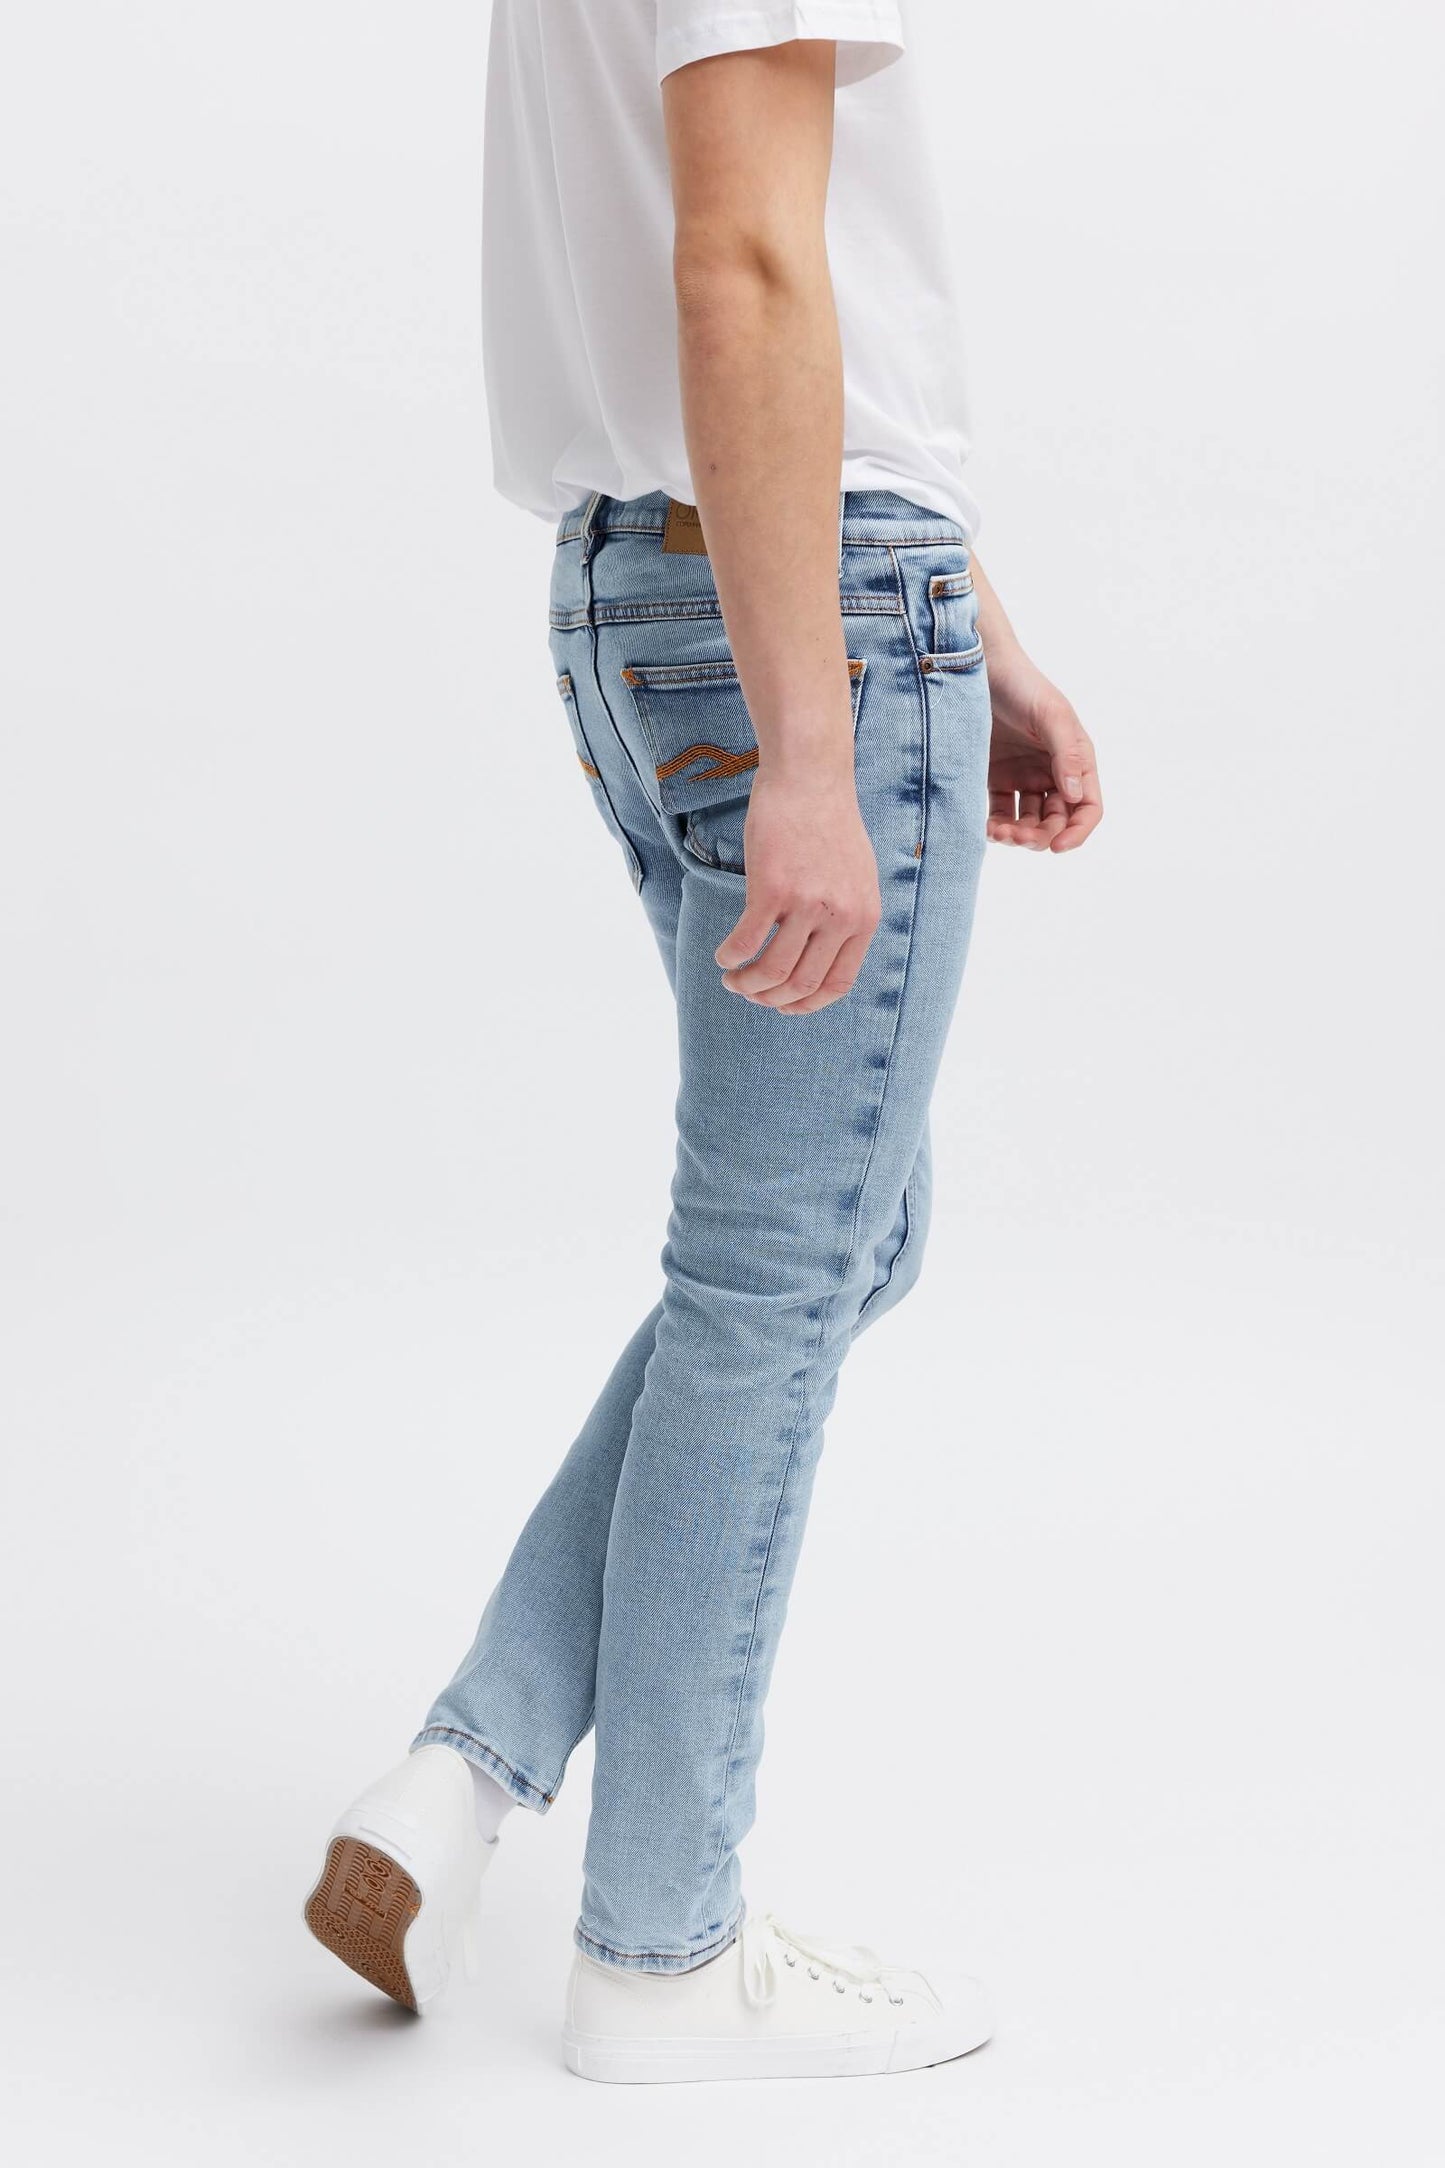 Best organic jeans for men - Slim tapered fit